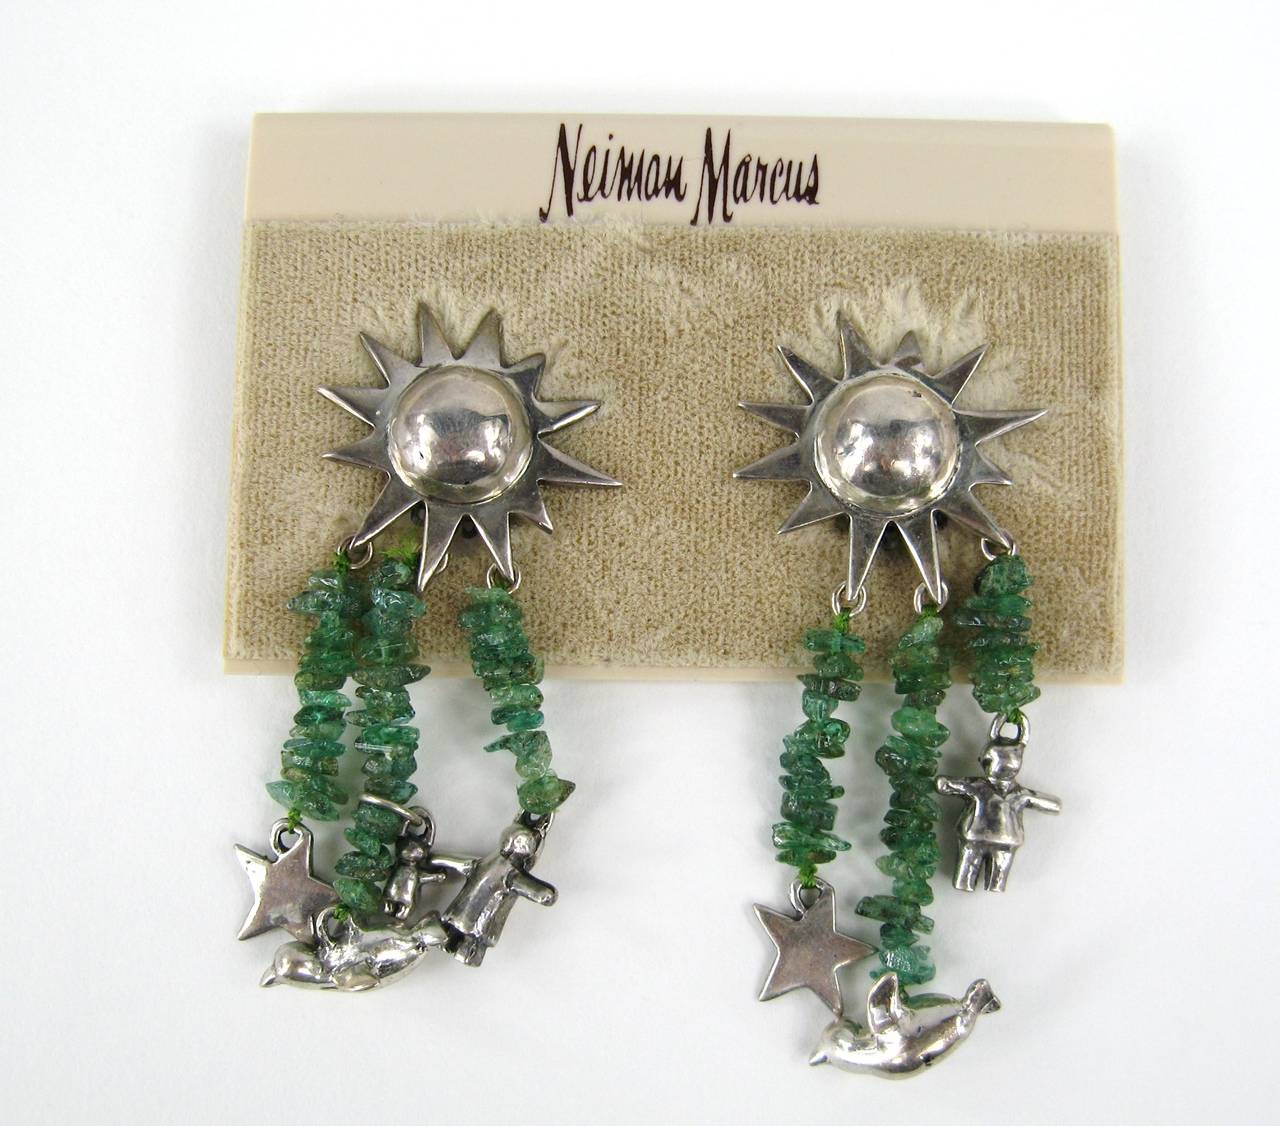 Still on the original Neiman Marcus earring Card
3 green stone with hanging charms 
Sun in sterling for your ear 
Measuring 
2.62